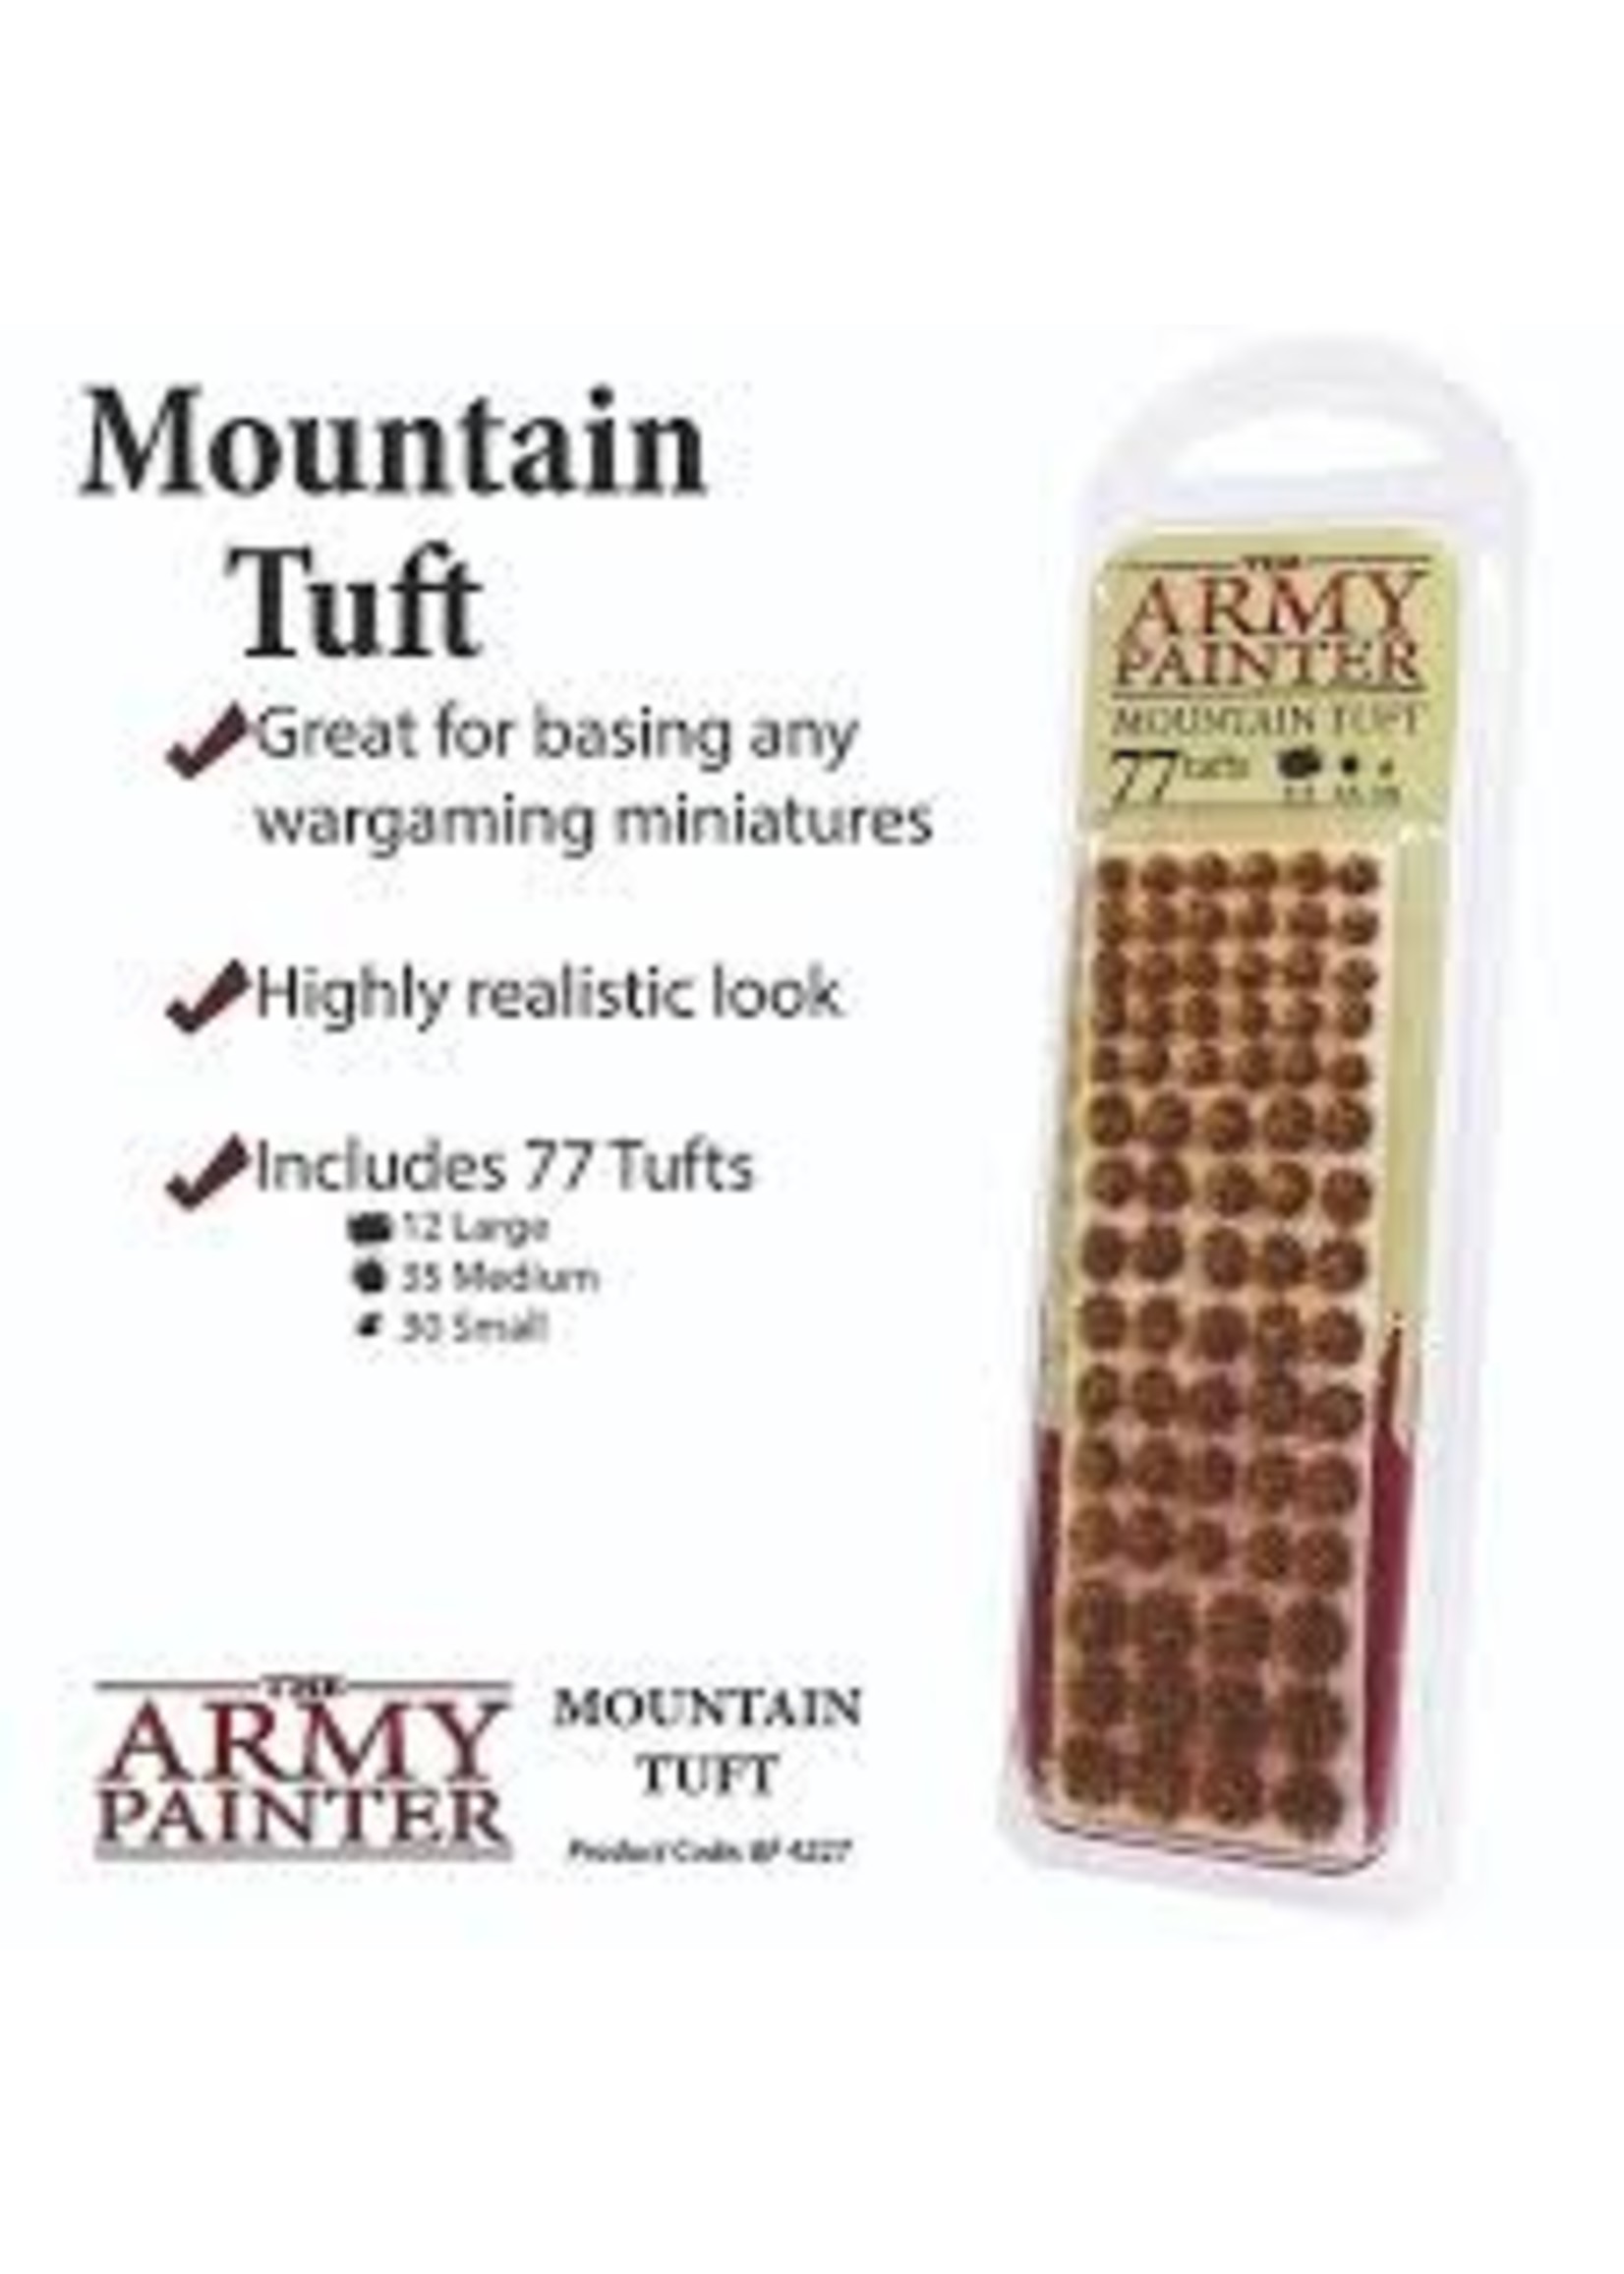 The Army Painter Tufts: Mountain